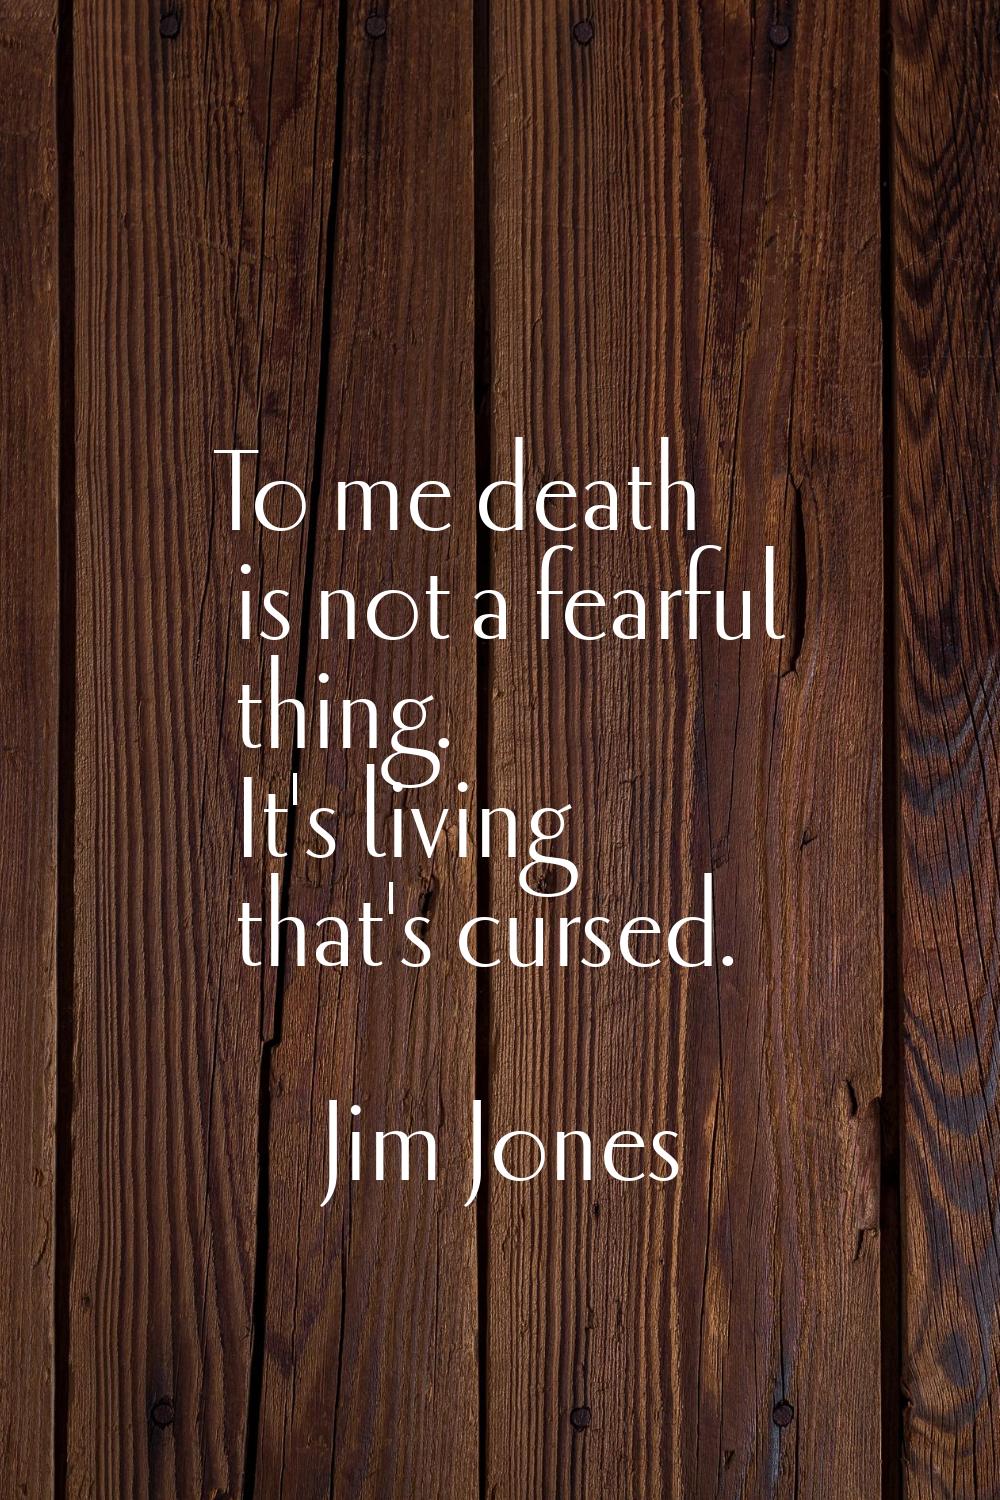 To me death is not a fearful thing. It's living that's cursed.